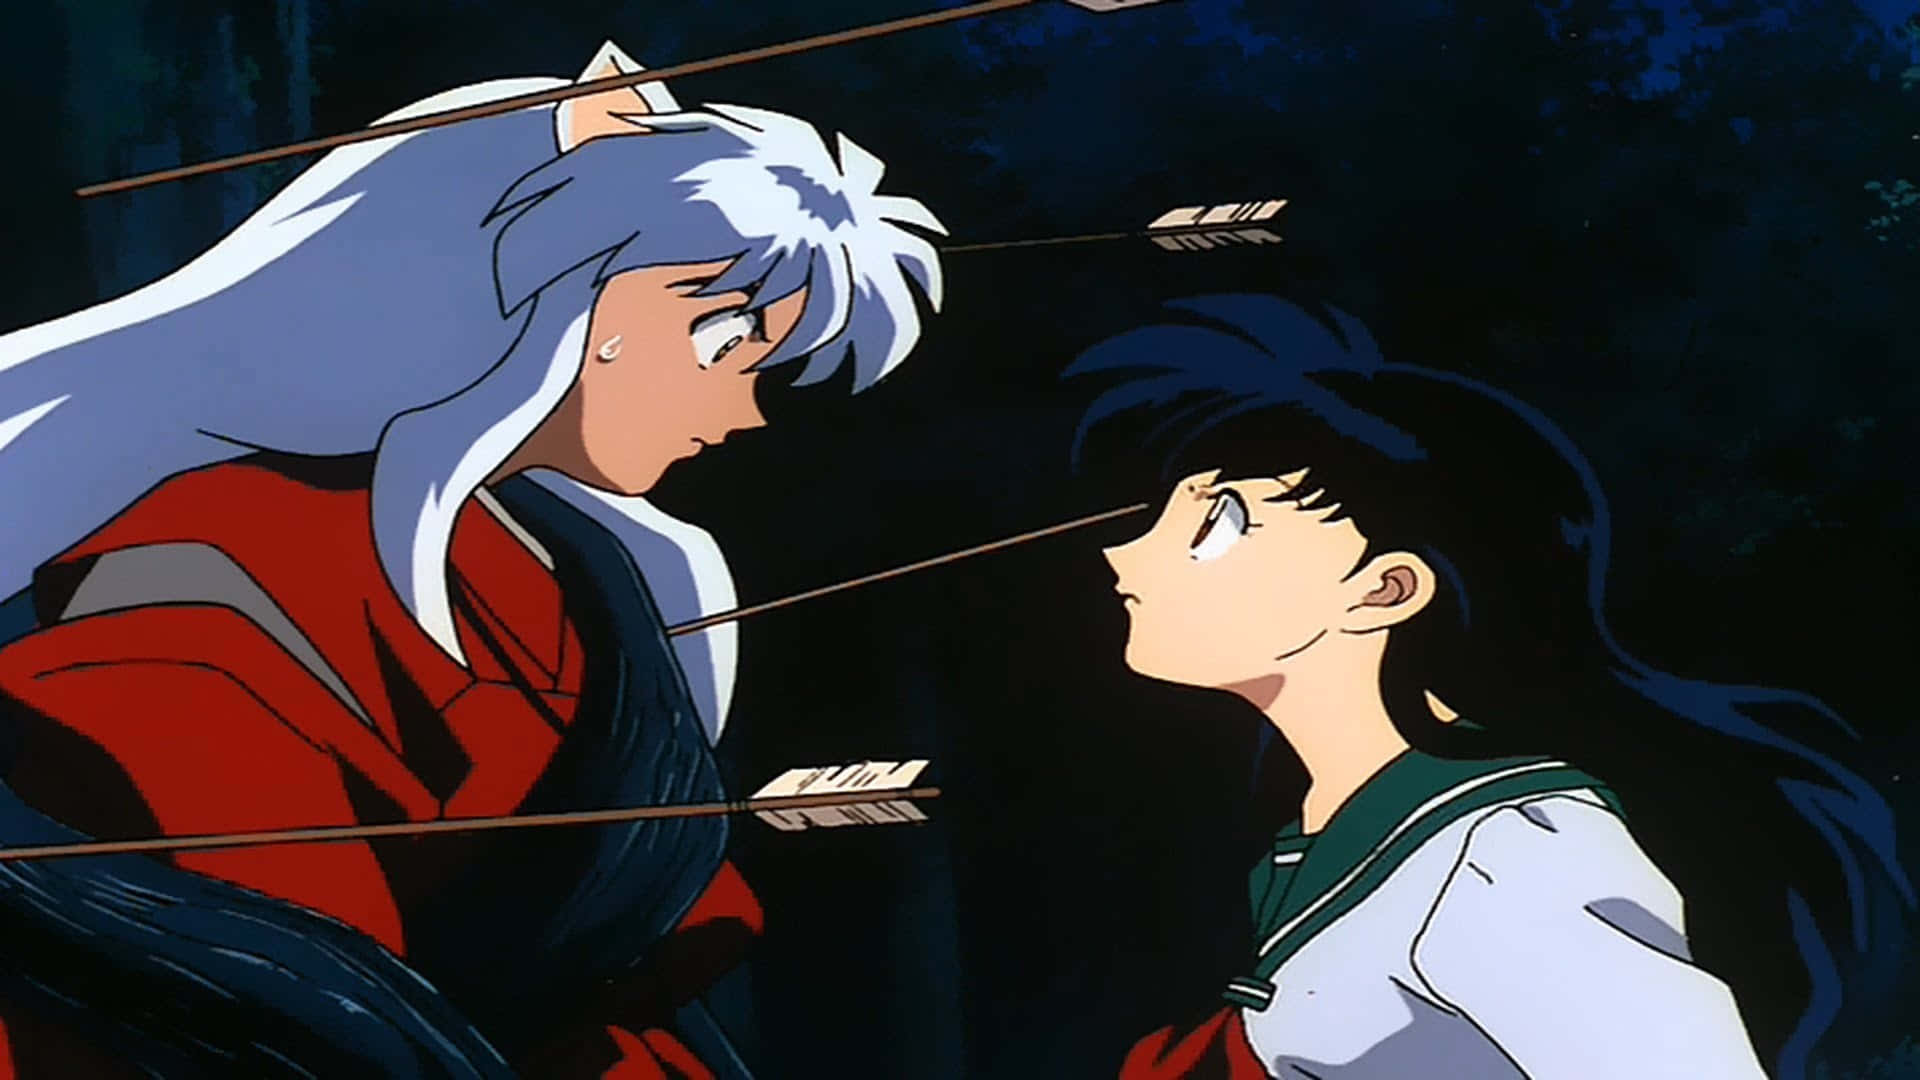 Protecting Kagome and the Sacred Jewel with determination